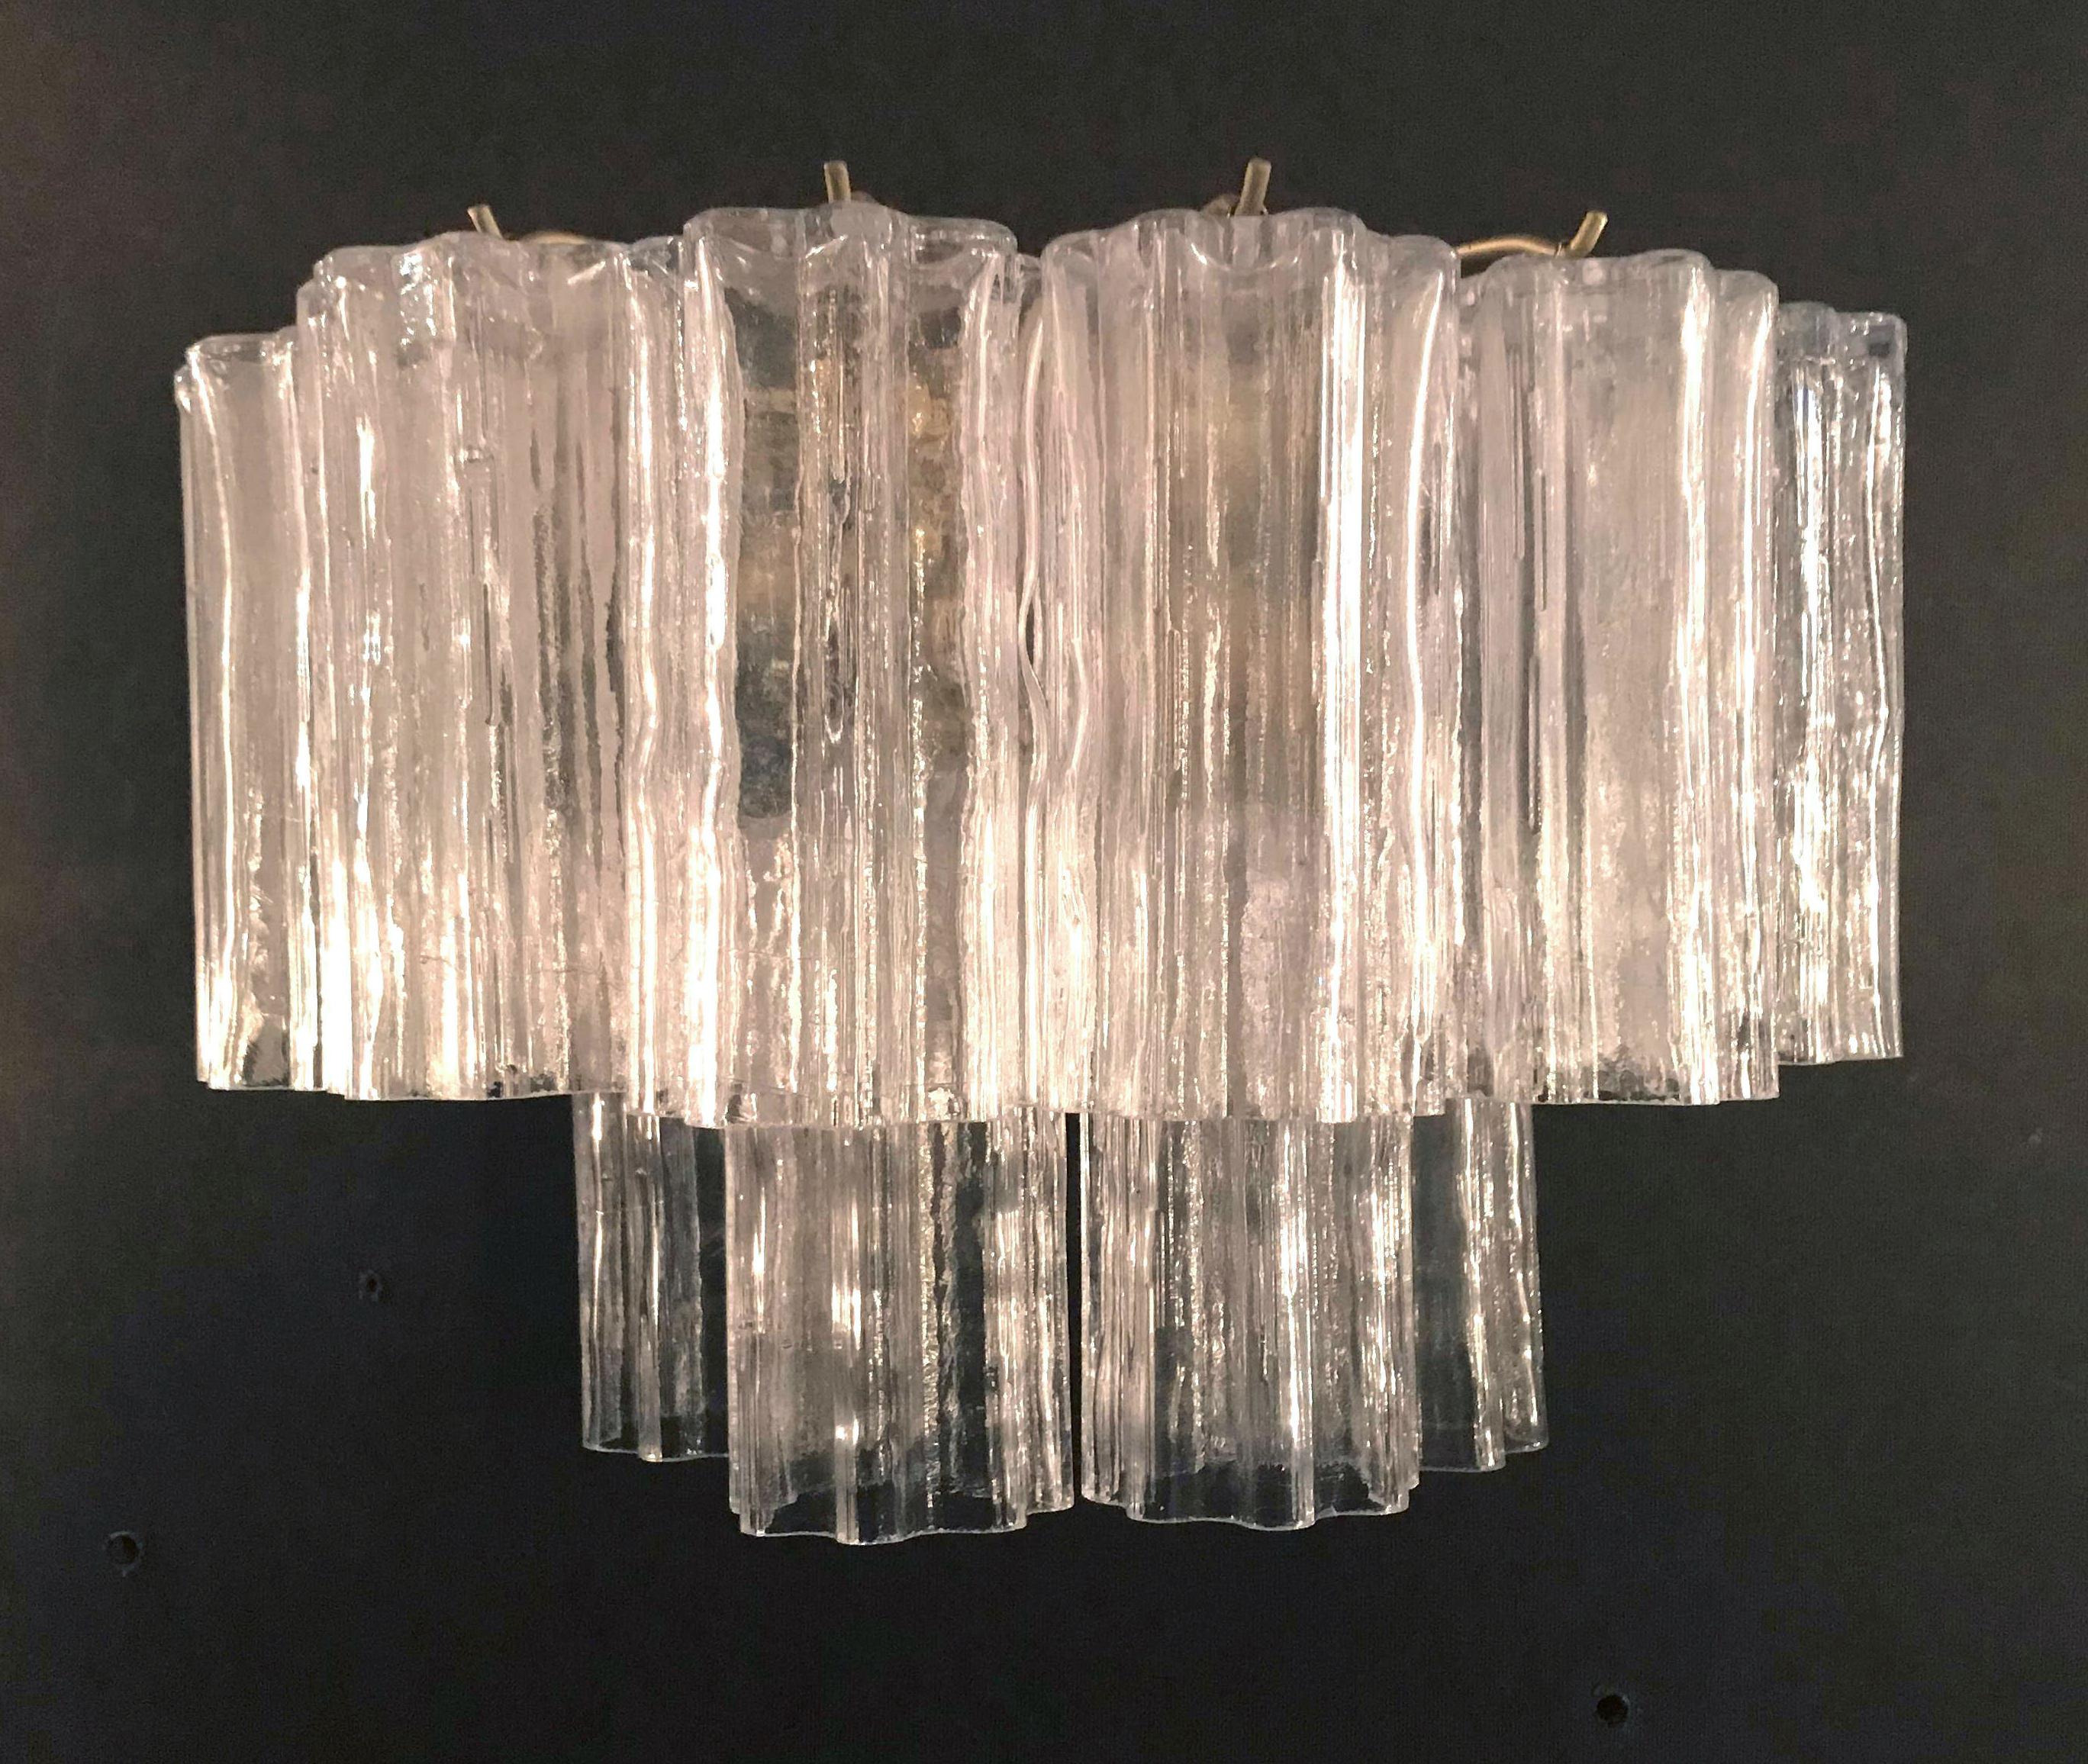 Vintage Italian wall lights with 12 clear Murano glasses blown in Tronchi technique, mounted on antiqued gold metal frames / Designed by Venini, circa 1960s / Made in Italy
2 lights / E26 or E27 type / max 60W each
Measures: Height 11 inches / width